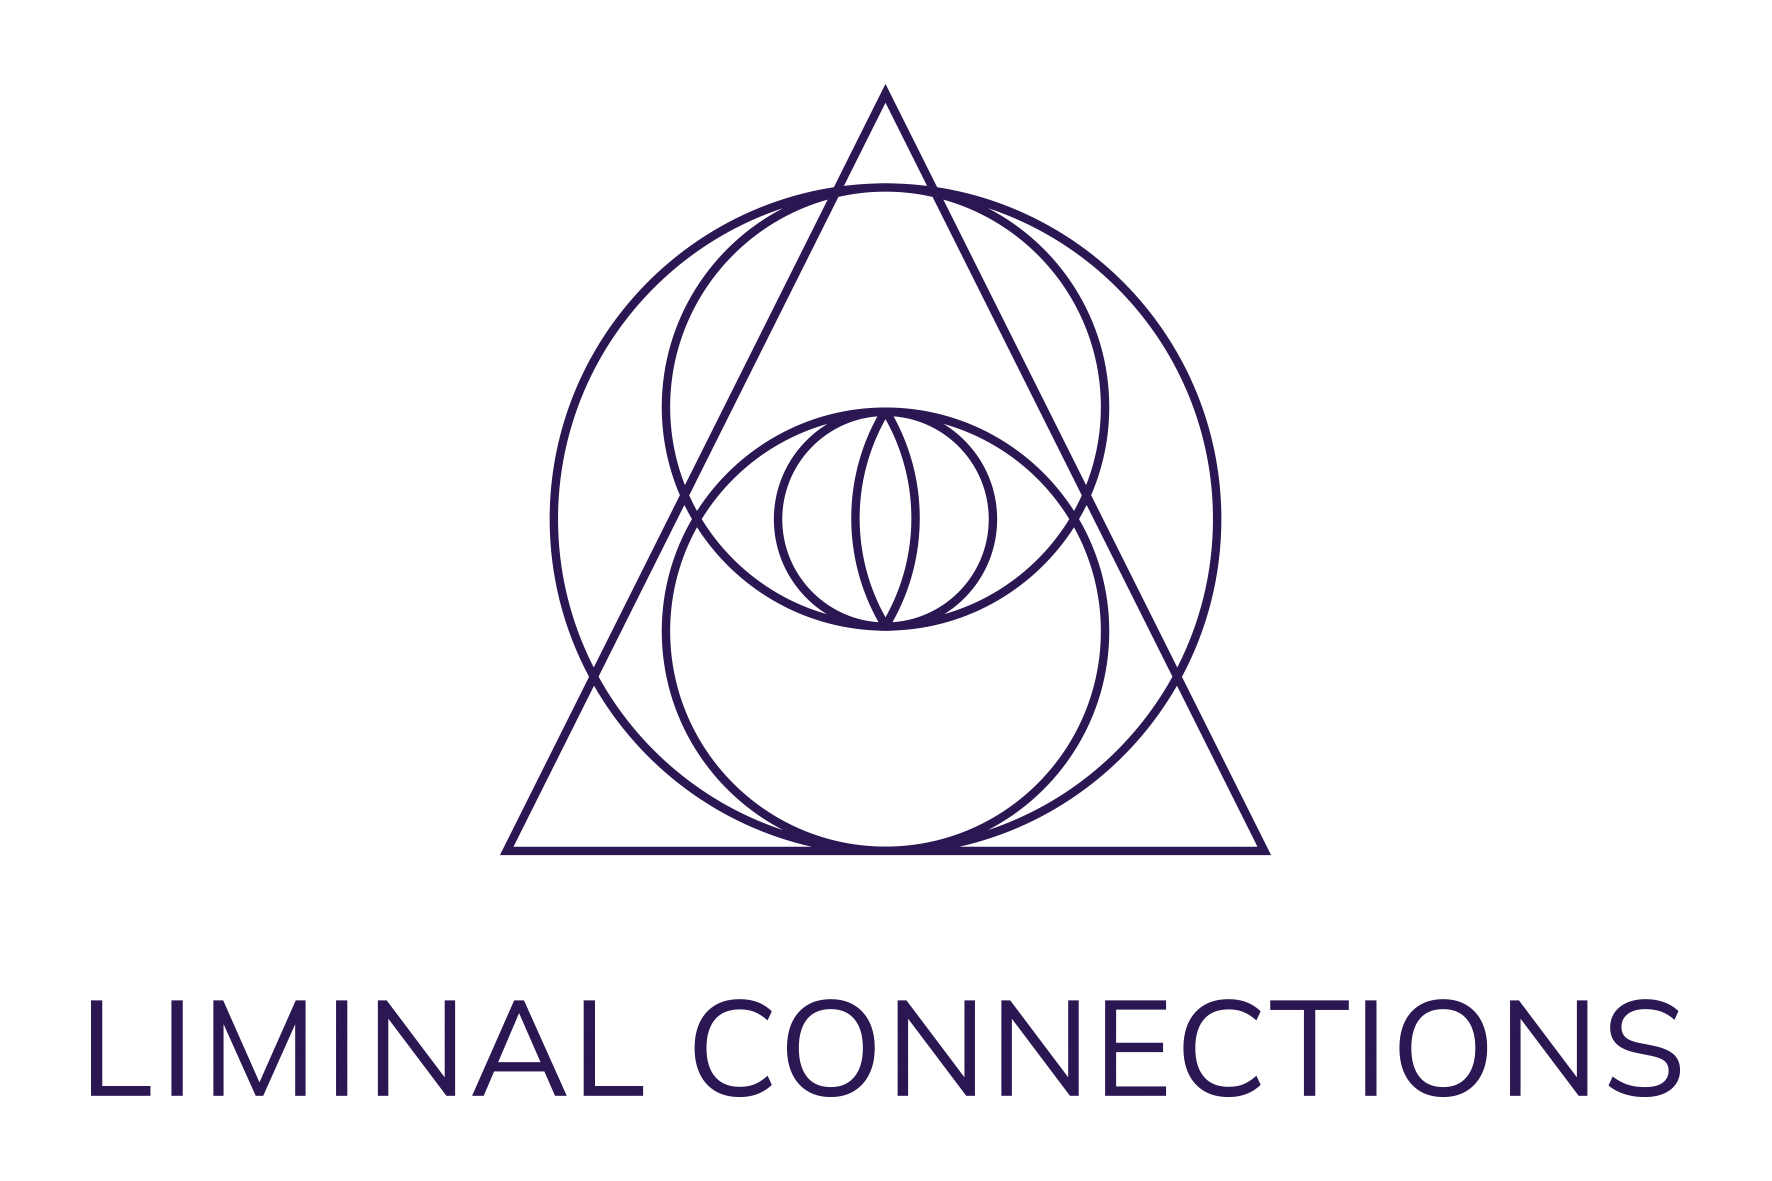 Liminal connections logo is a triangle with overlapping circles and an eye in the centre